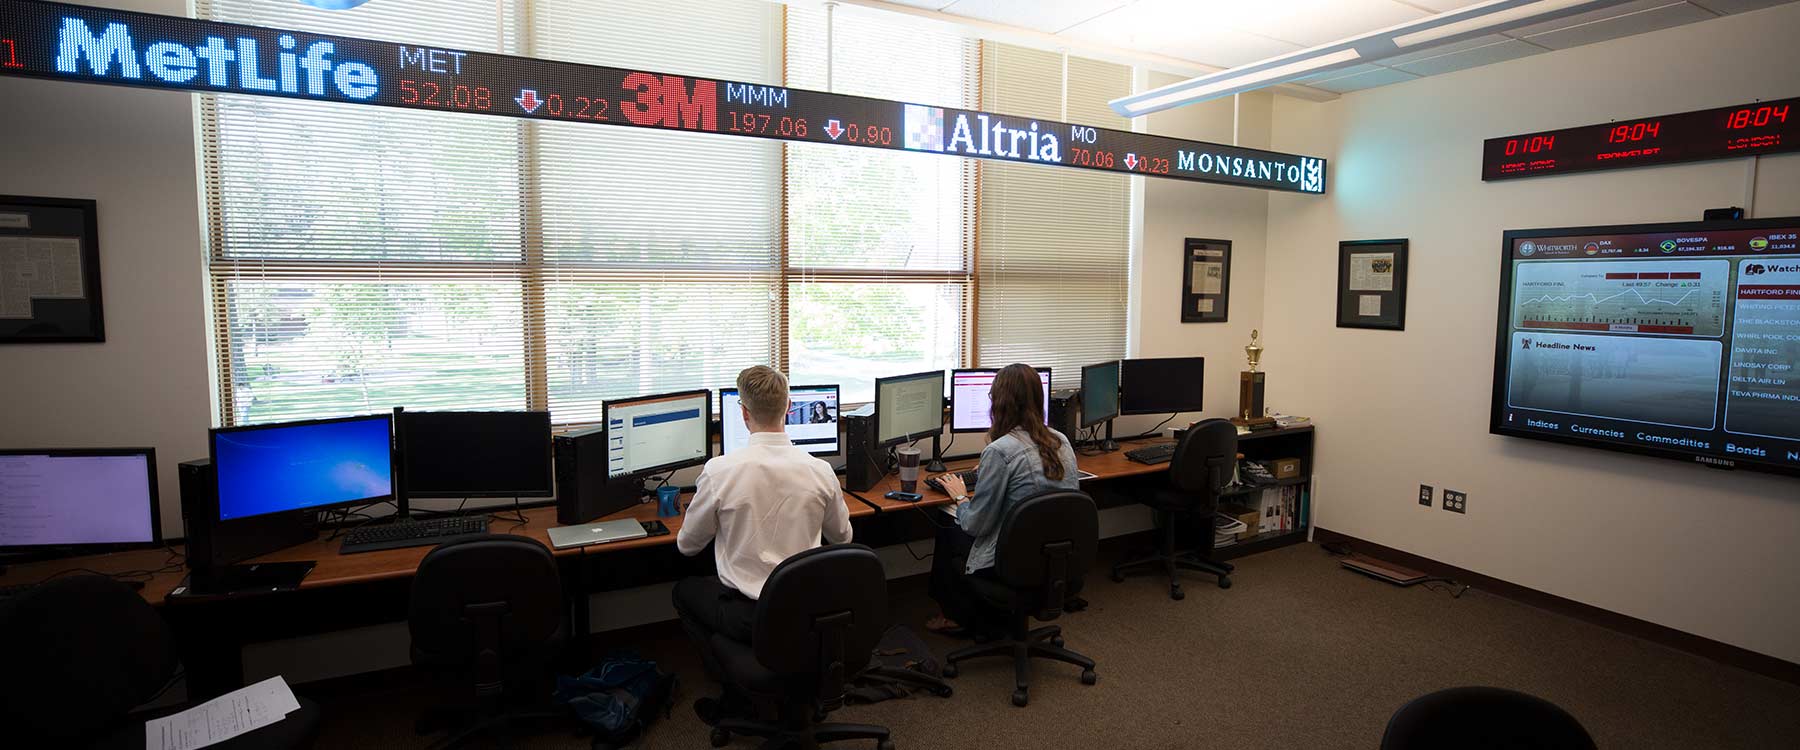 Students work on computers in the Whitworth Finance room. Above them a stock price ticker displays stock changes. 